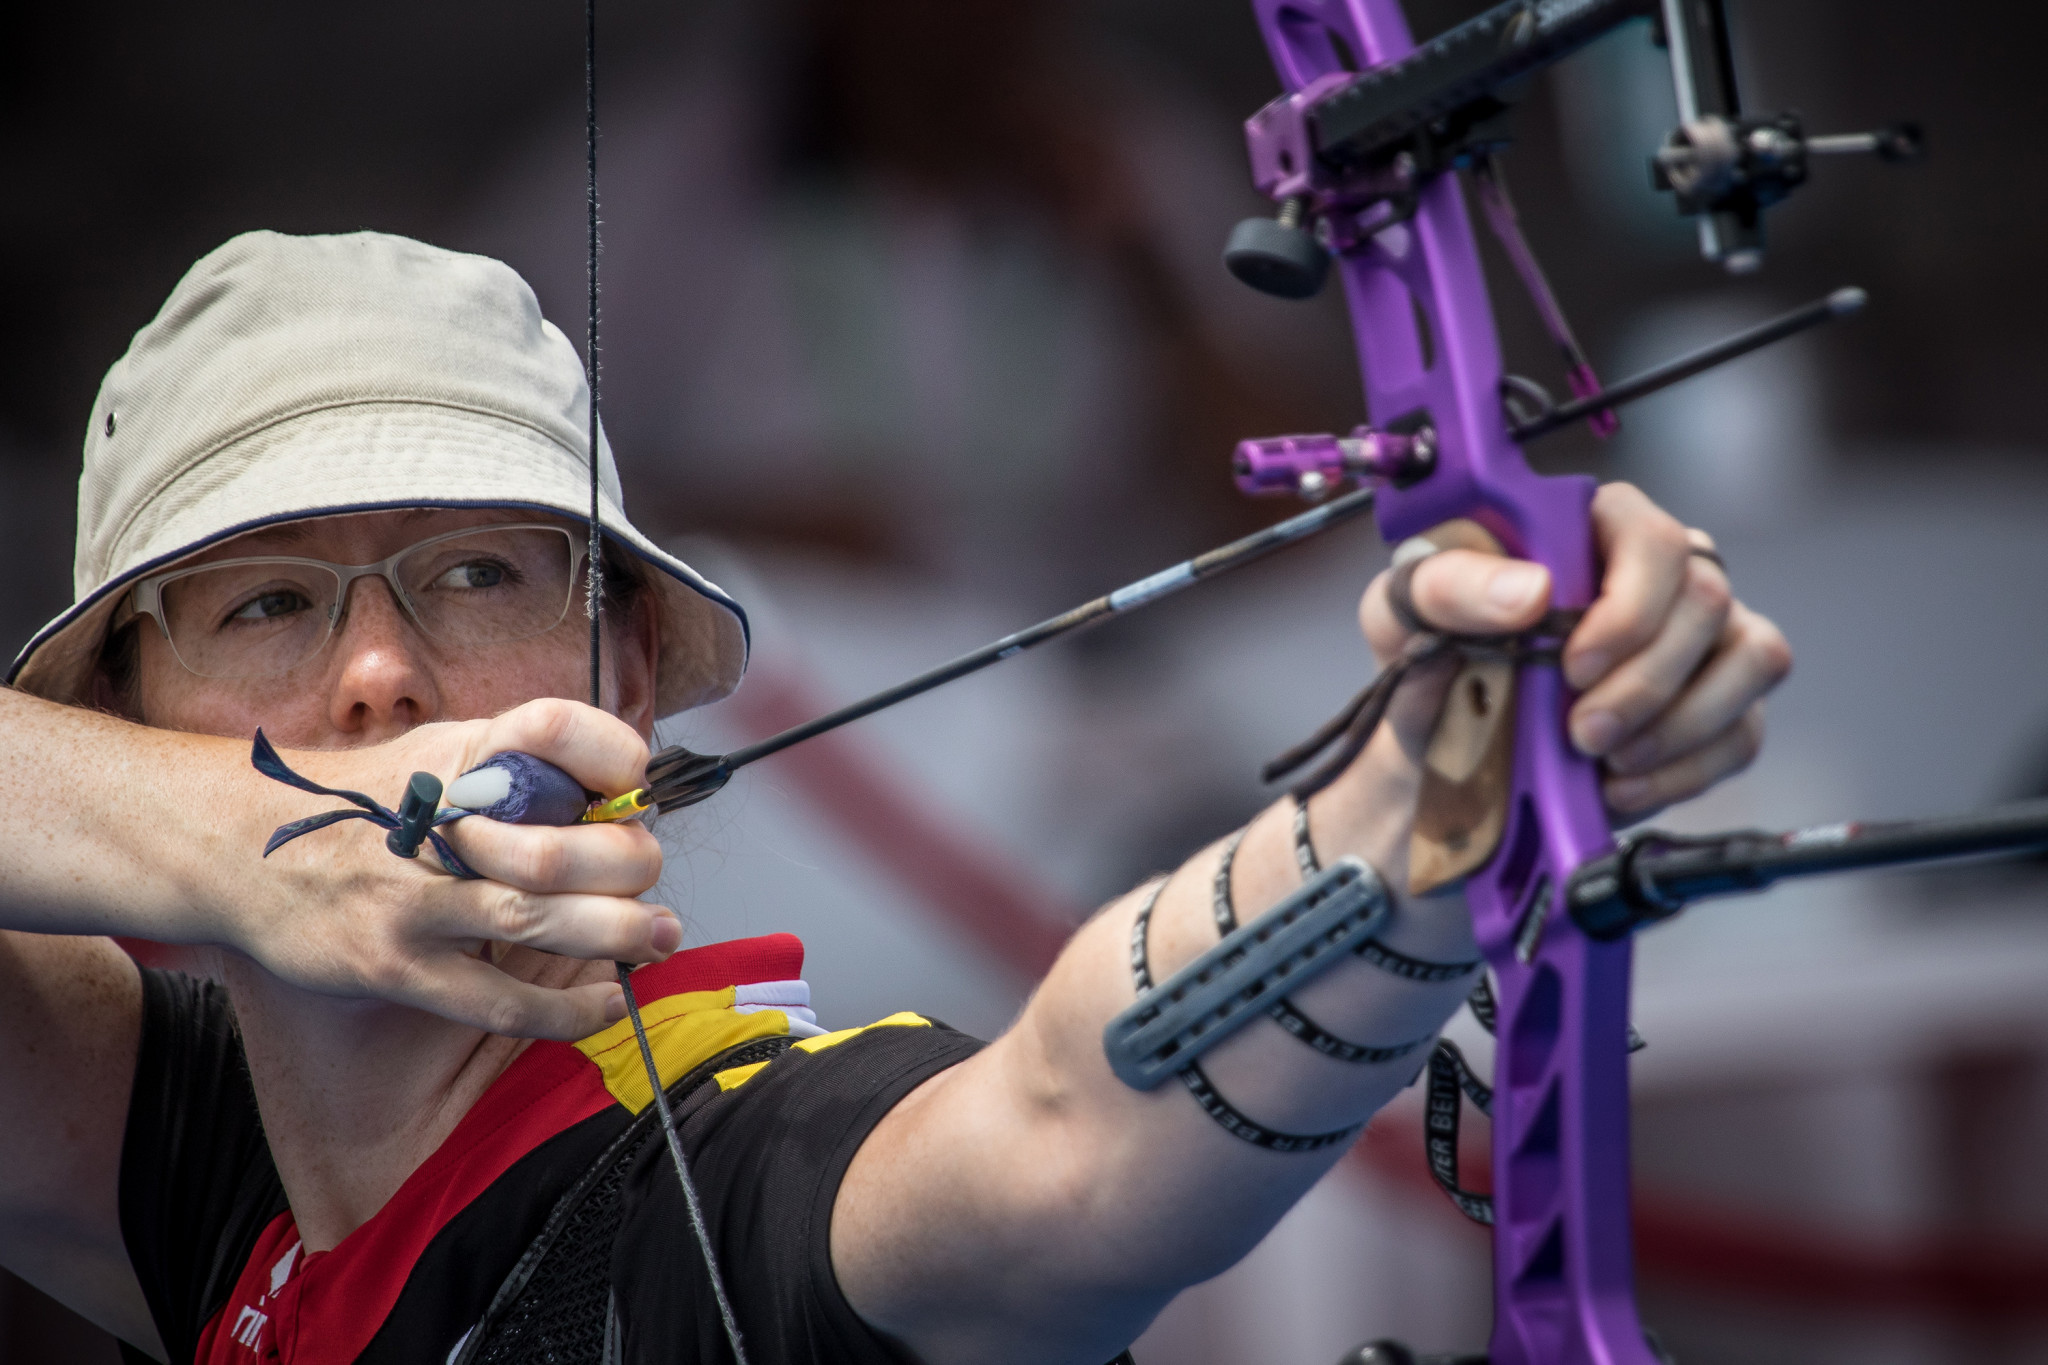  Lisa Unruh reached the women's recurve final on home soil at the Archery World Cup in Berlin ©Getty Images